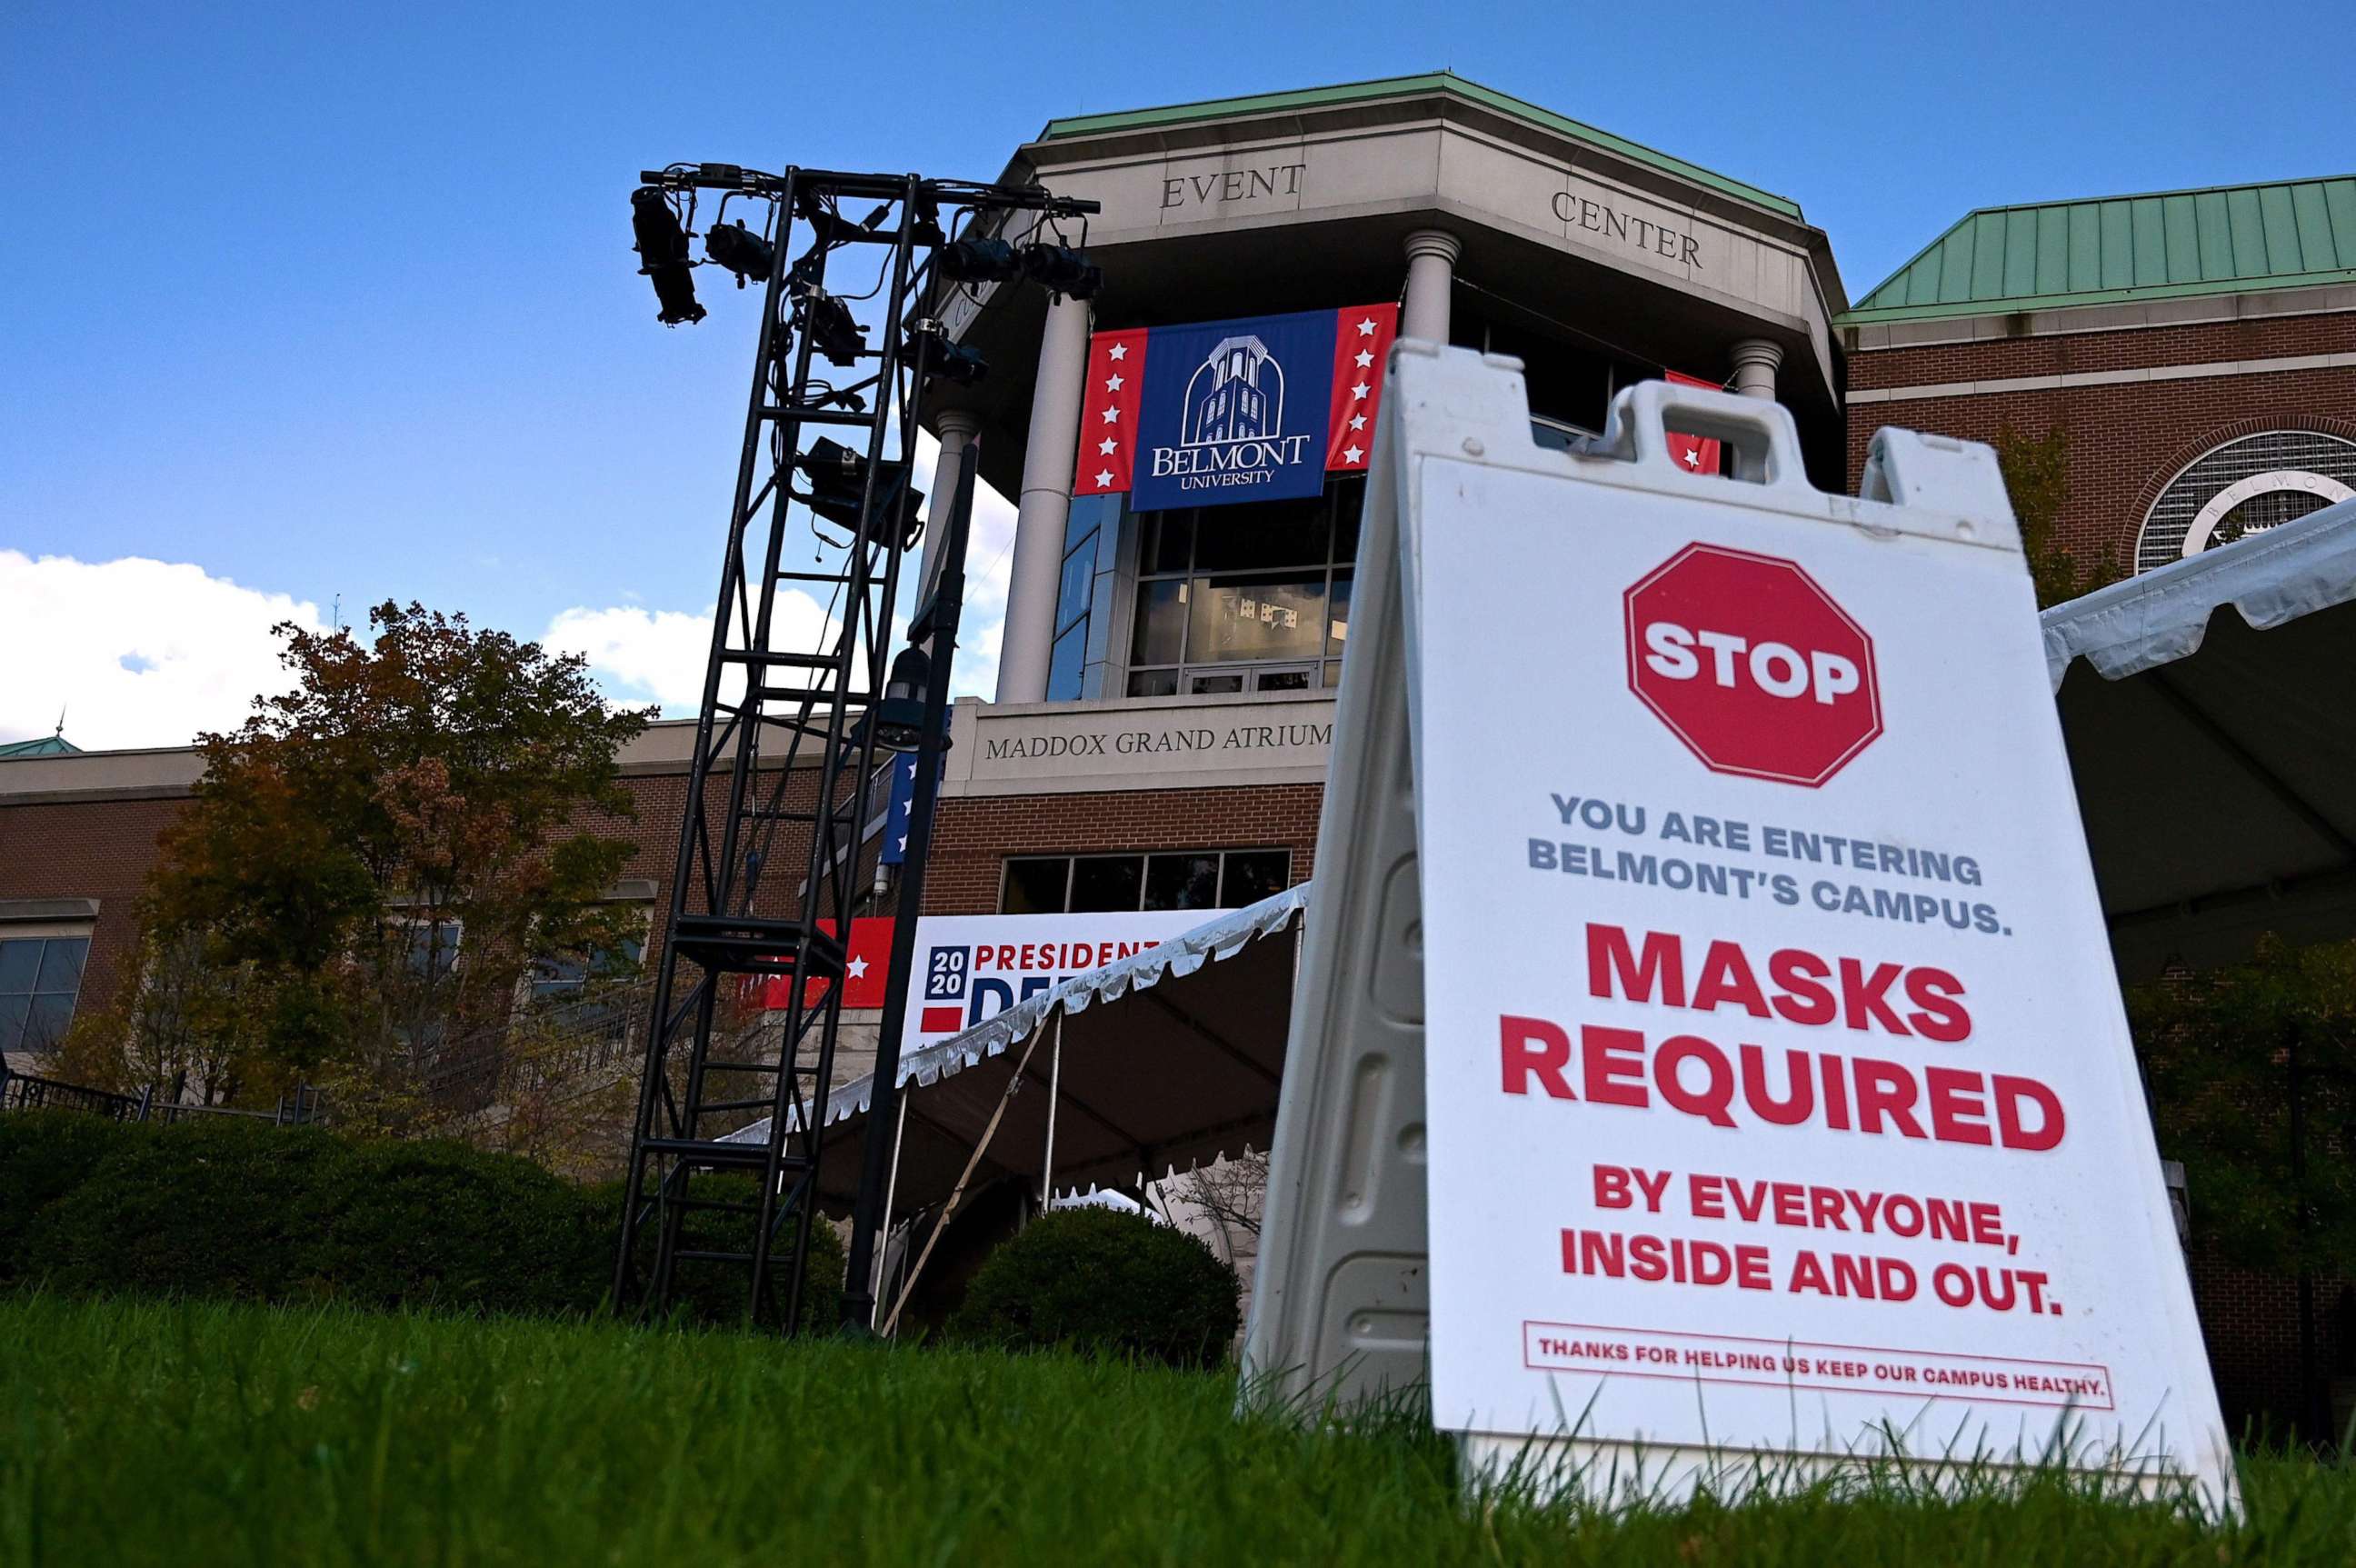 PHOTO: A "masks required" sign is seen at Belmont University near the entrance of the 2020 U.S. presidential election debate hall on Oct. 21, 2020, in Nashville, Tenn.